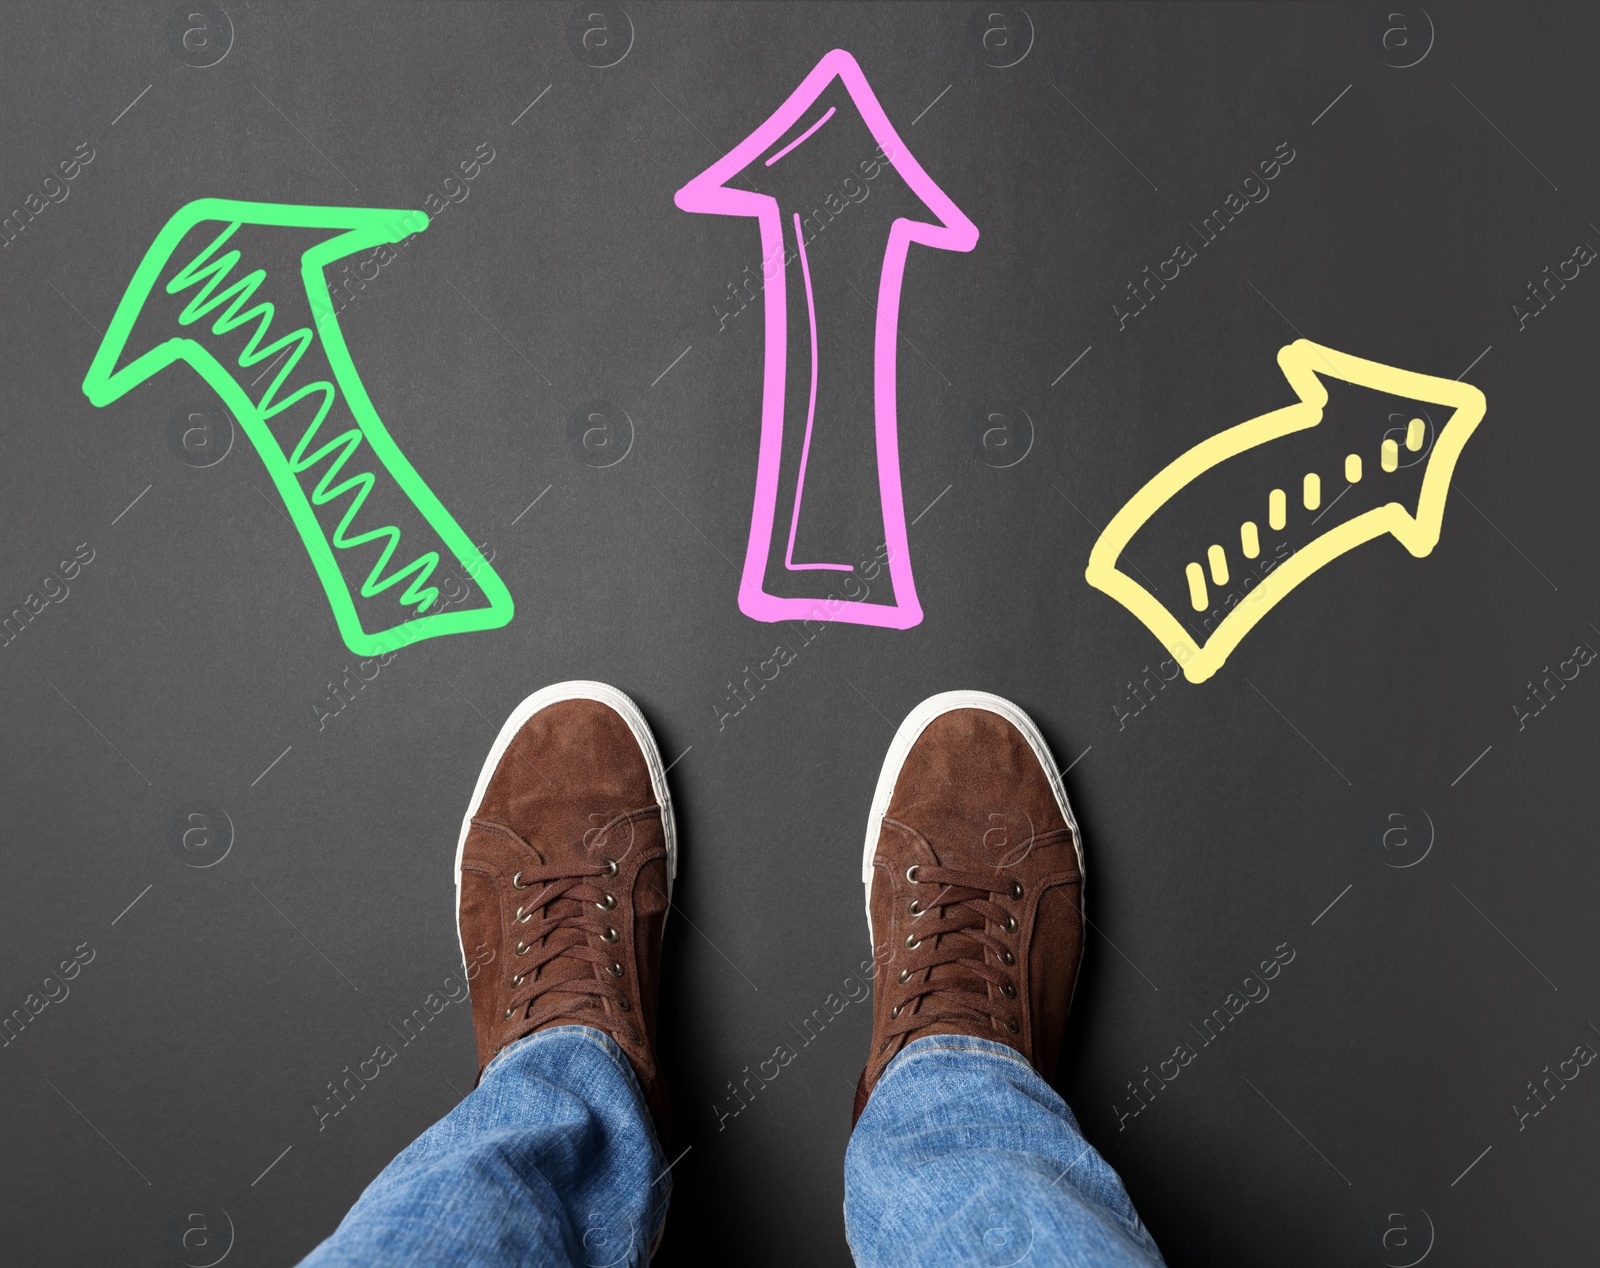 Image of Choosing future profession. Man standing in front of drawn signs on black background, top view. Arrows pointing in different directions symbolizing diversity of opportunities